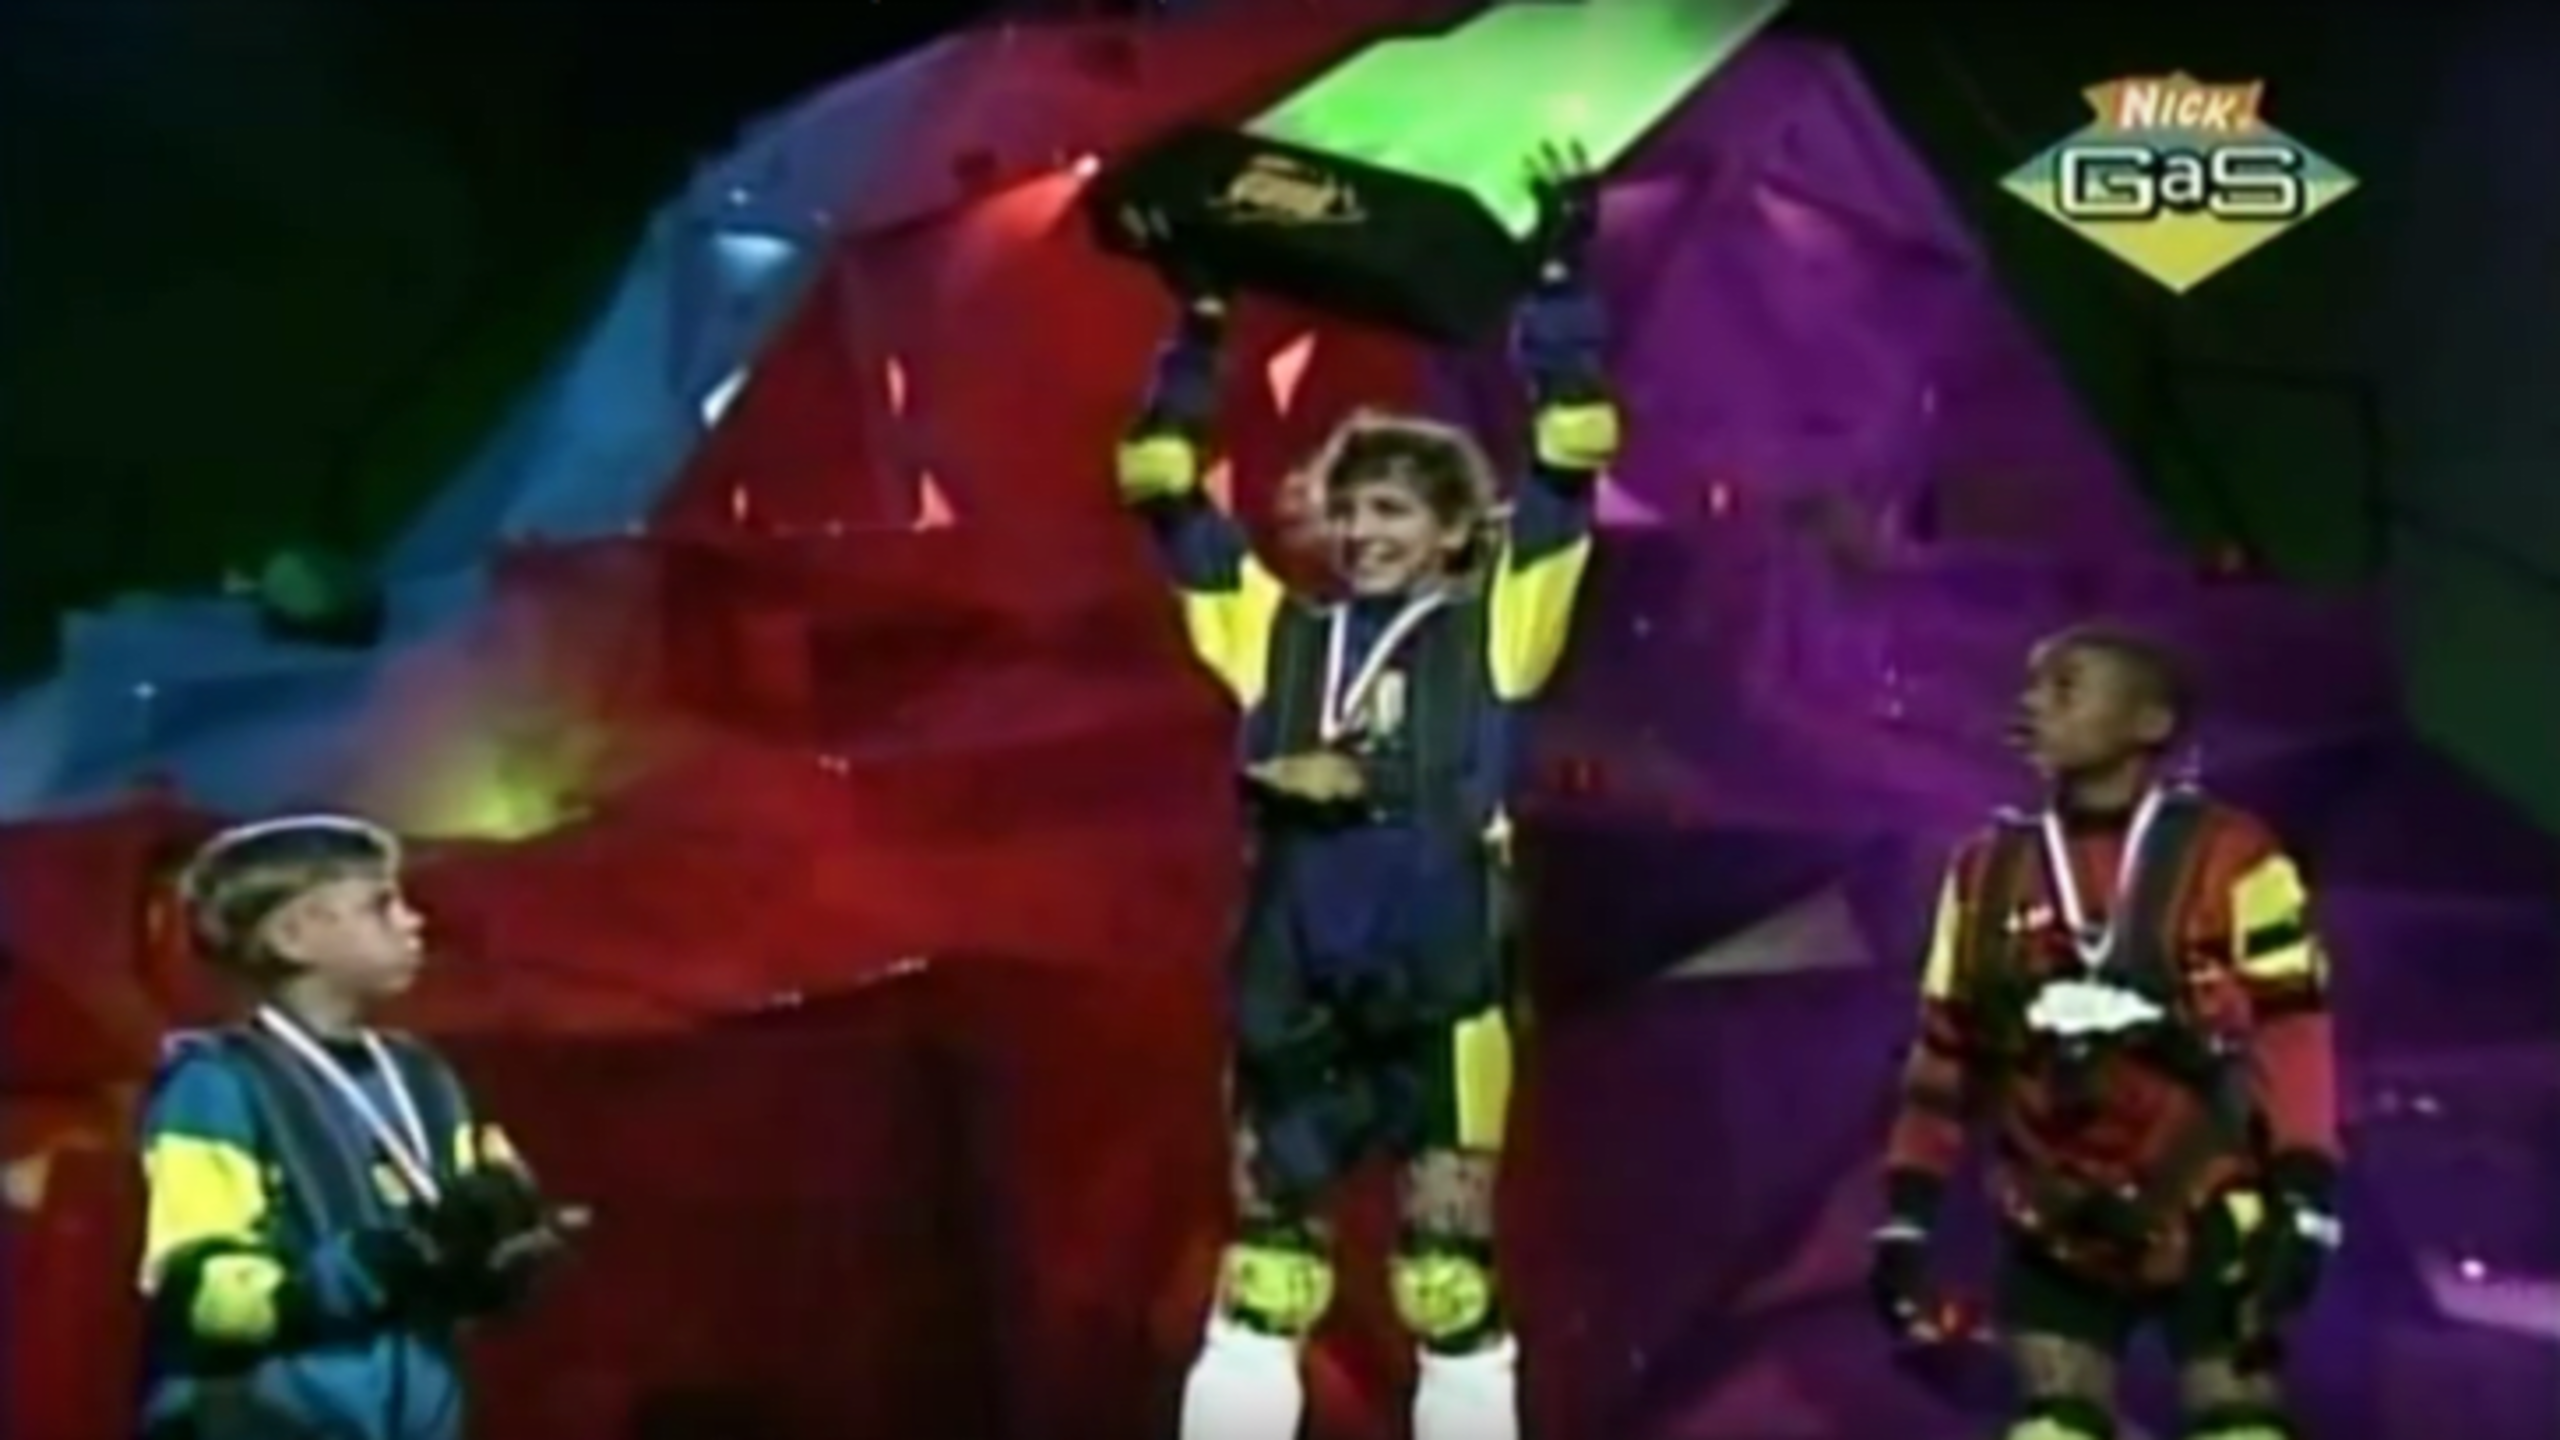 I Wish There was an Adult aggro crag